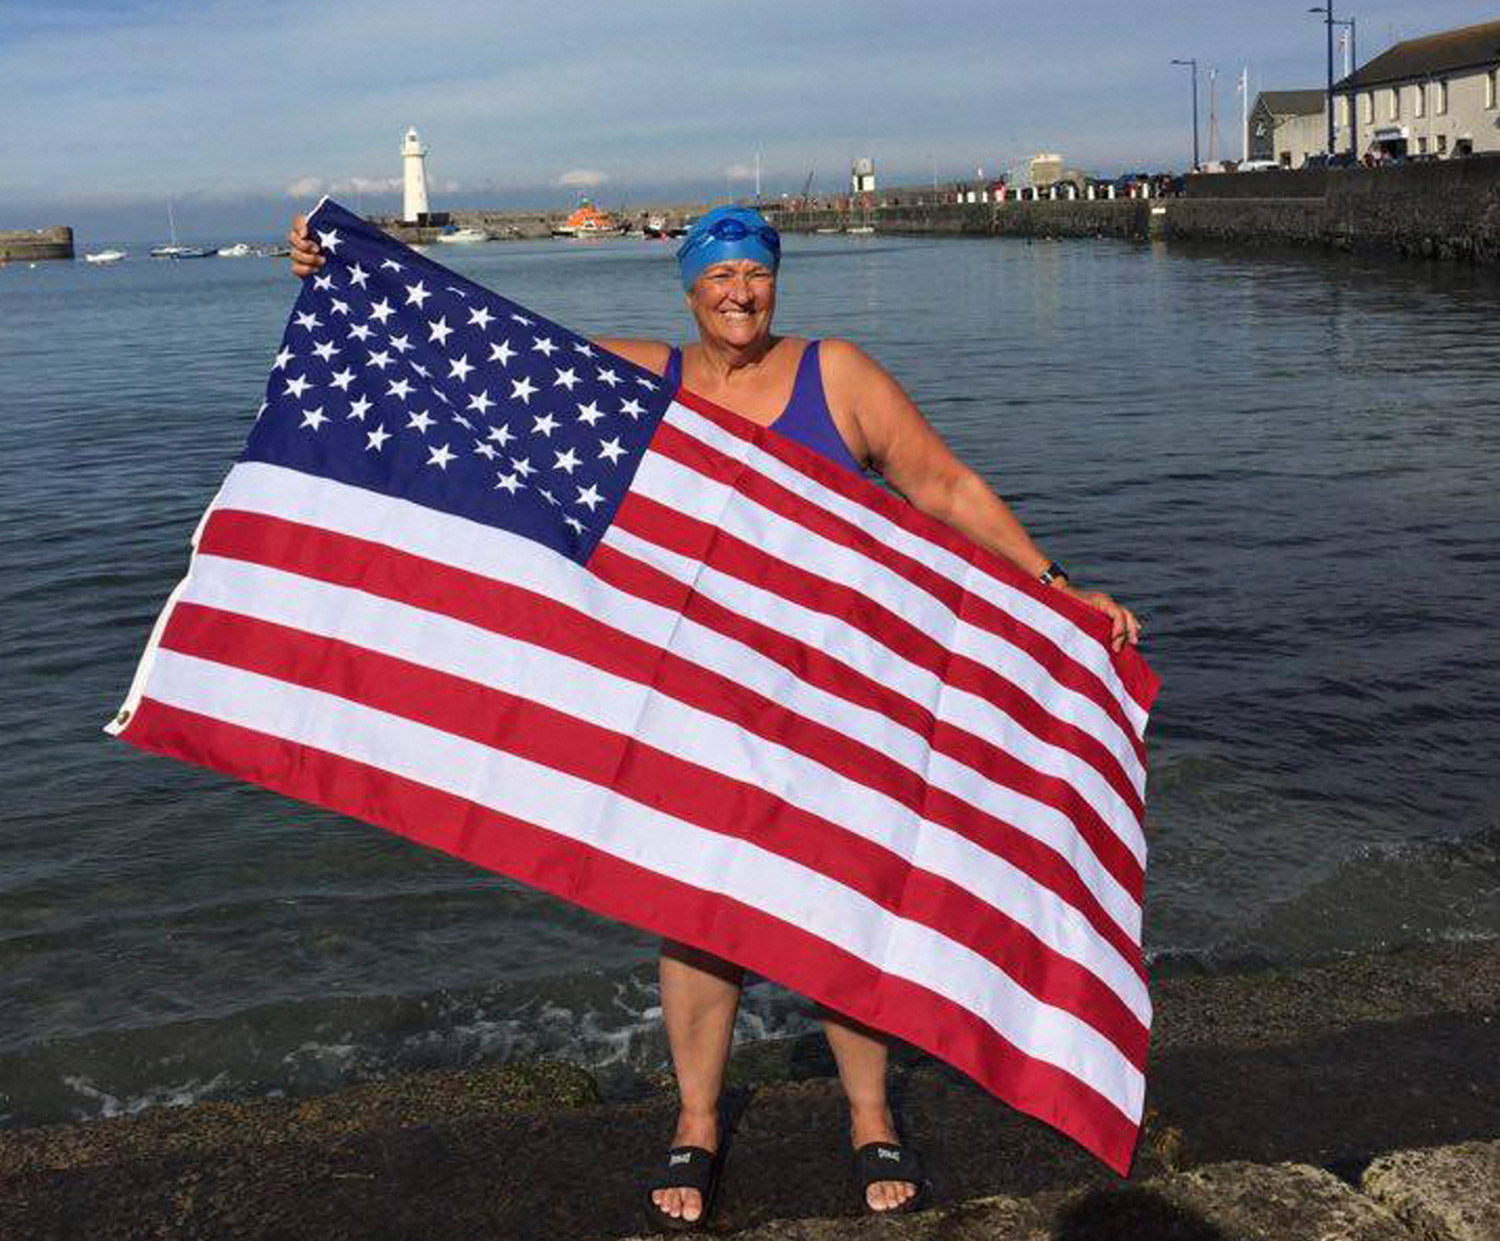 Pat Gallant-Charette holds an American flag on the shore of Donaghadee, Northern Ireland, Thursday to celebrate her crossing of the North Channel of the Irish Sea the previous day. She left from Donaghadee and swam to Scotland. Photo by Tom Charette